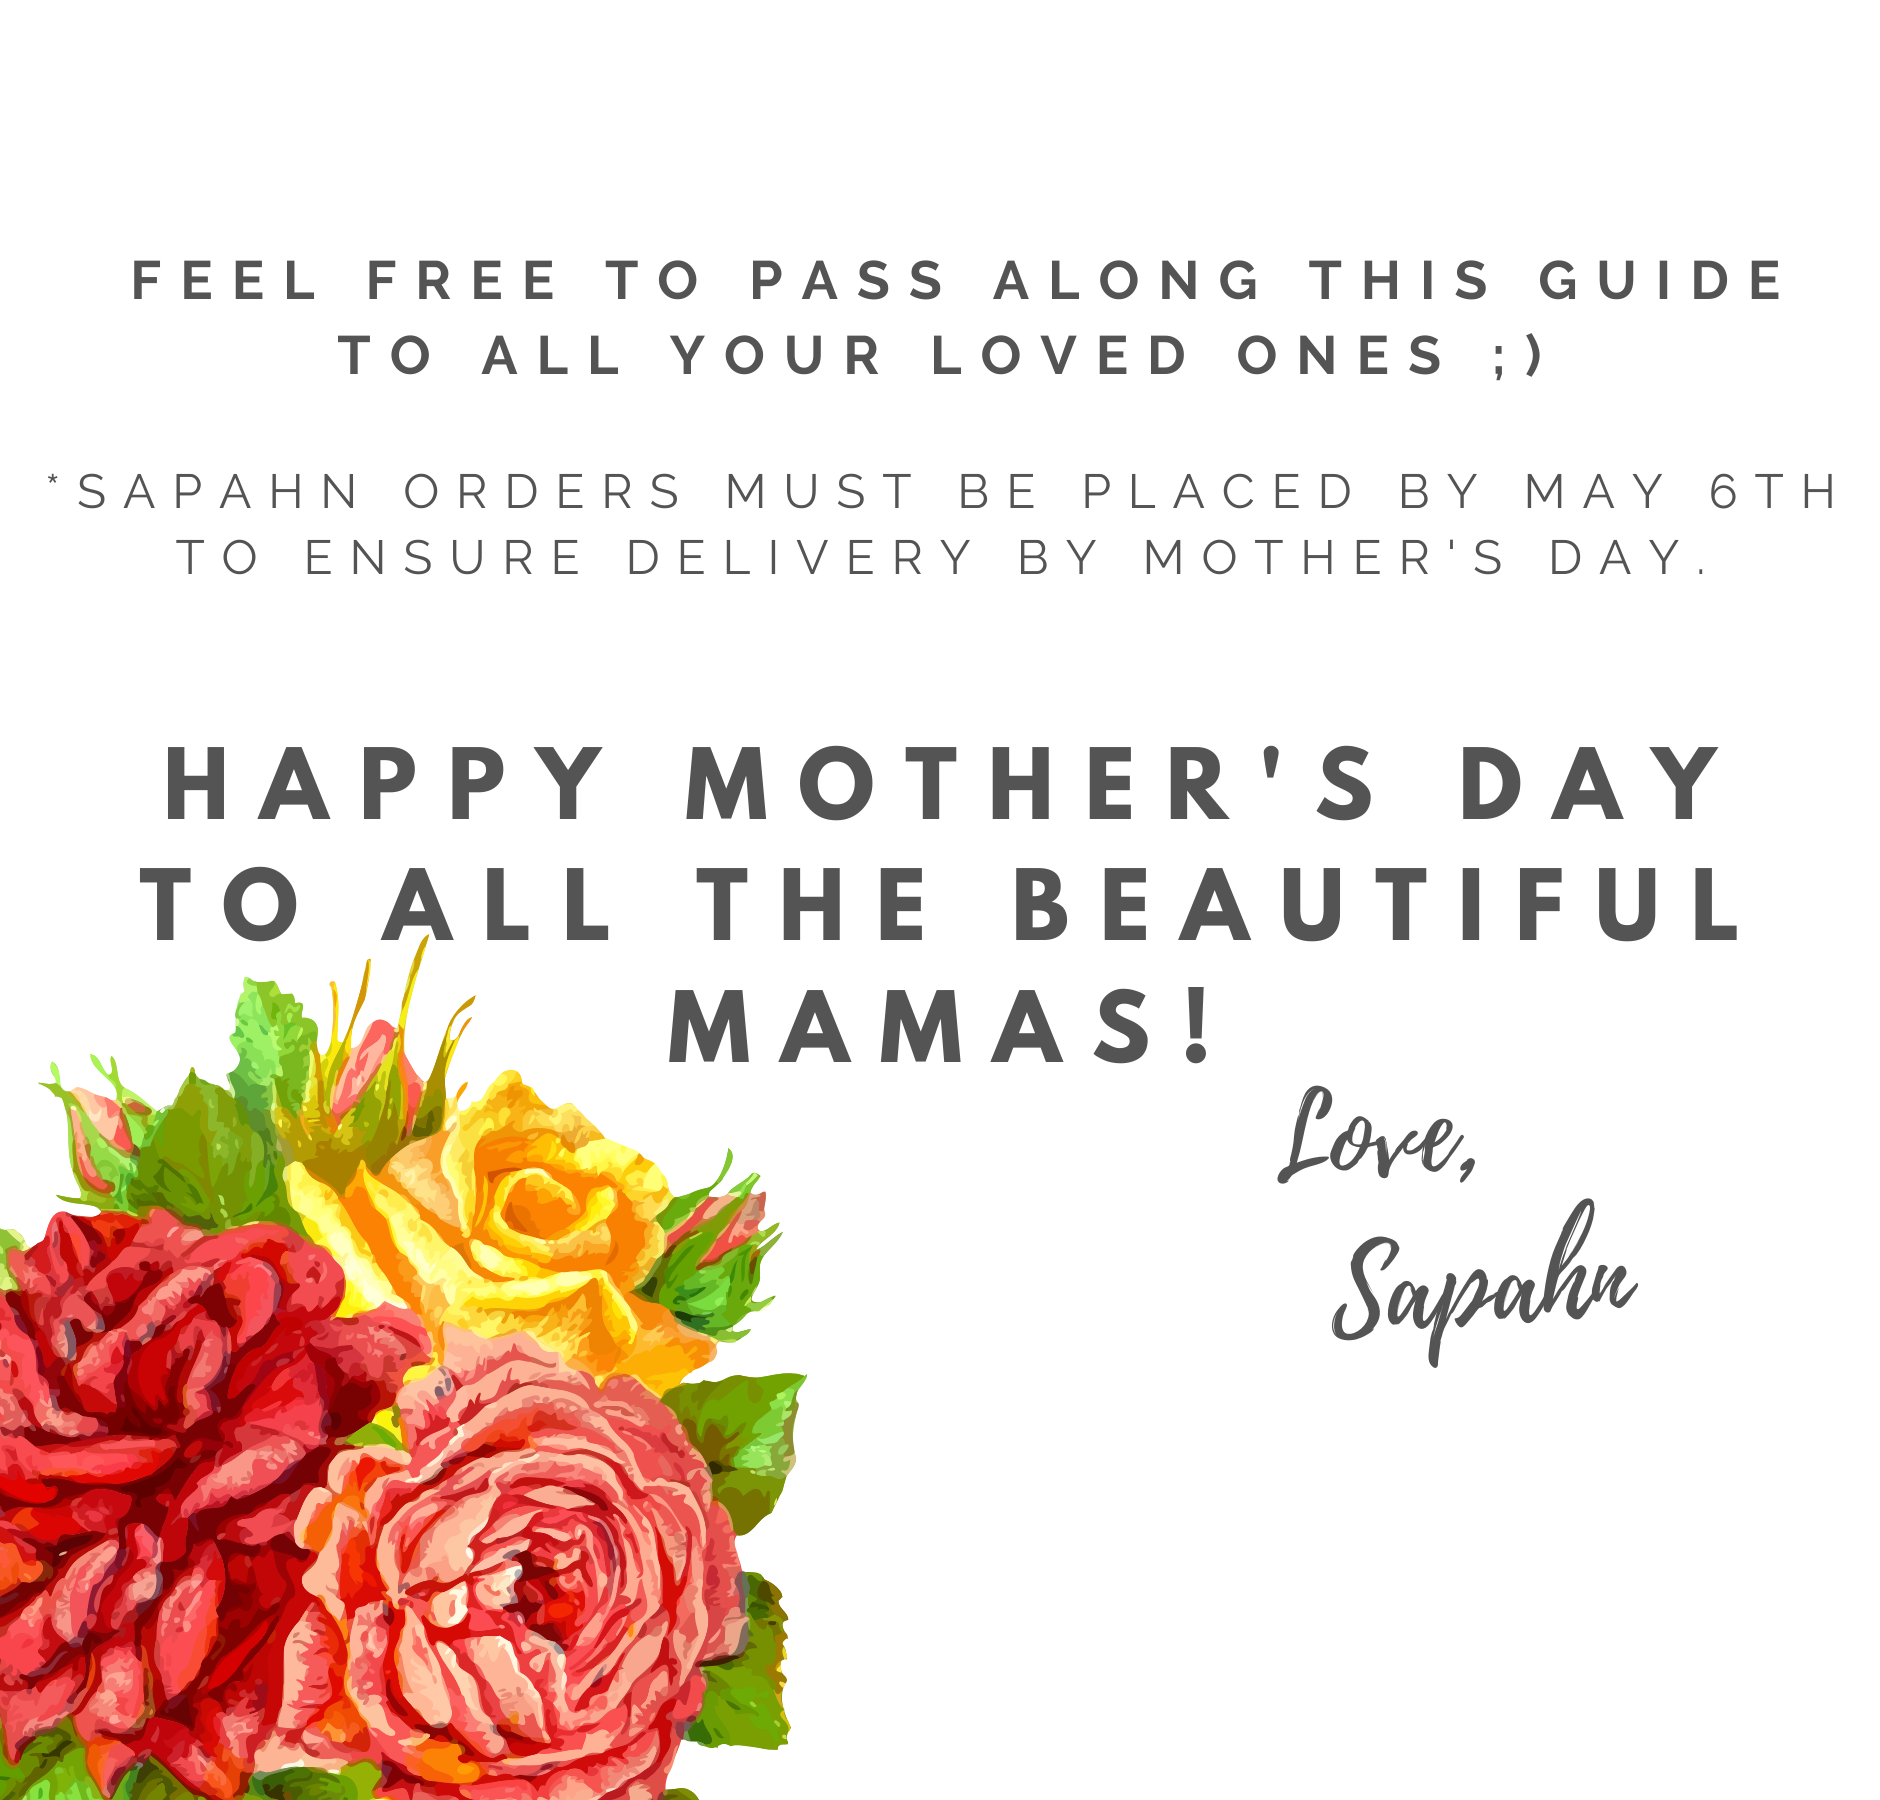 Creating Moments: Sapahn's Mother's Day Guide